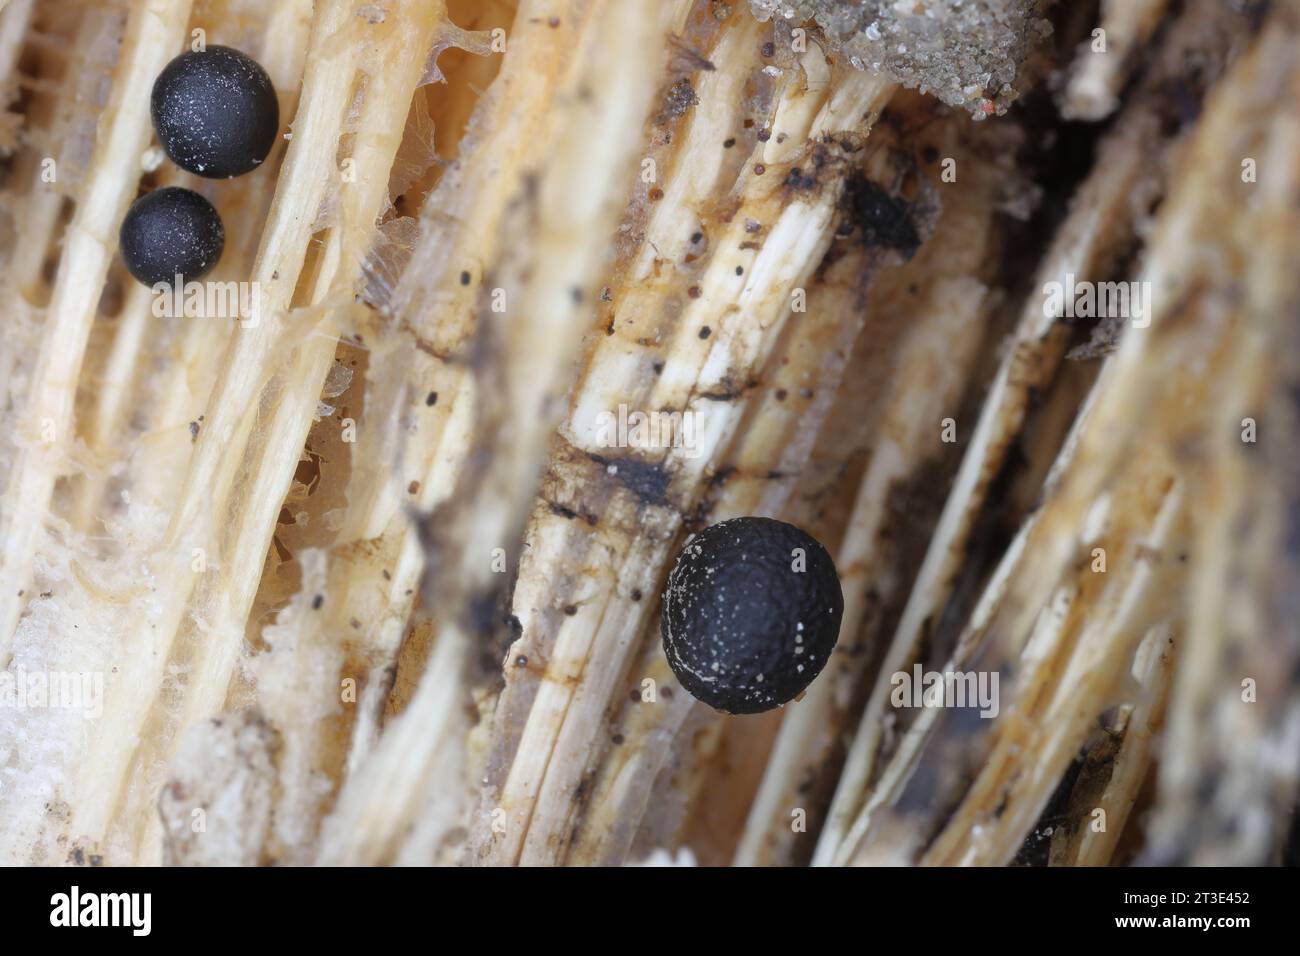 Mycelium and its round formations, fruiting bodies inside the dry stem of an herbaceous plant. High magnification. Stock Photo